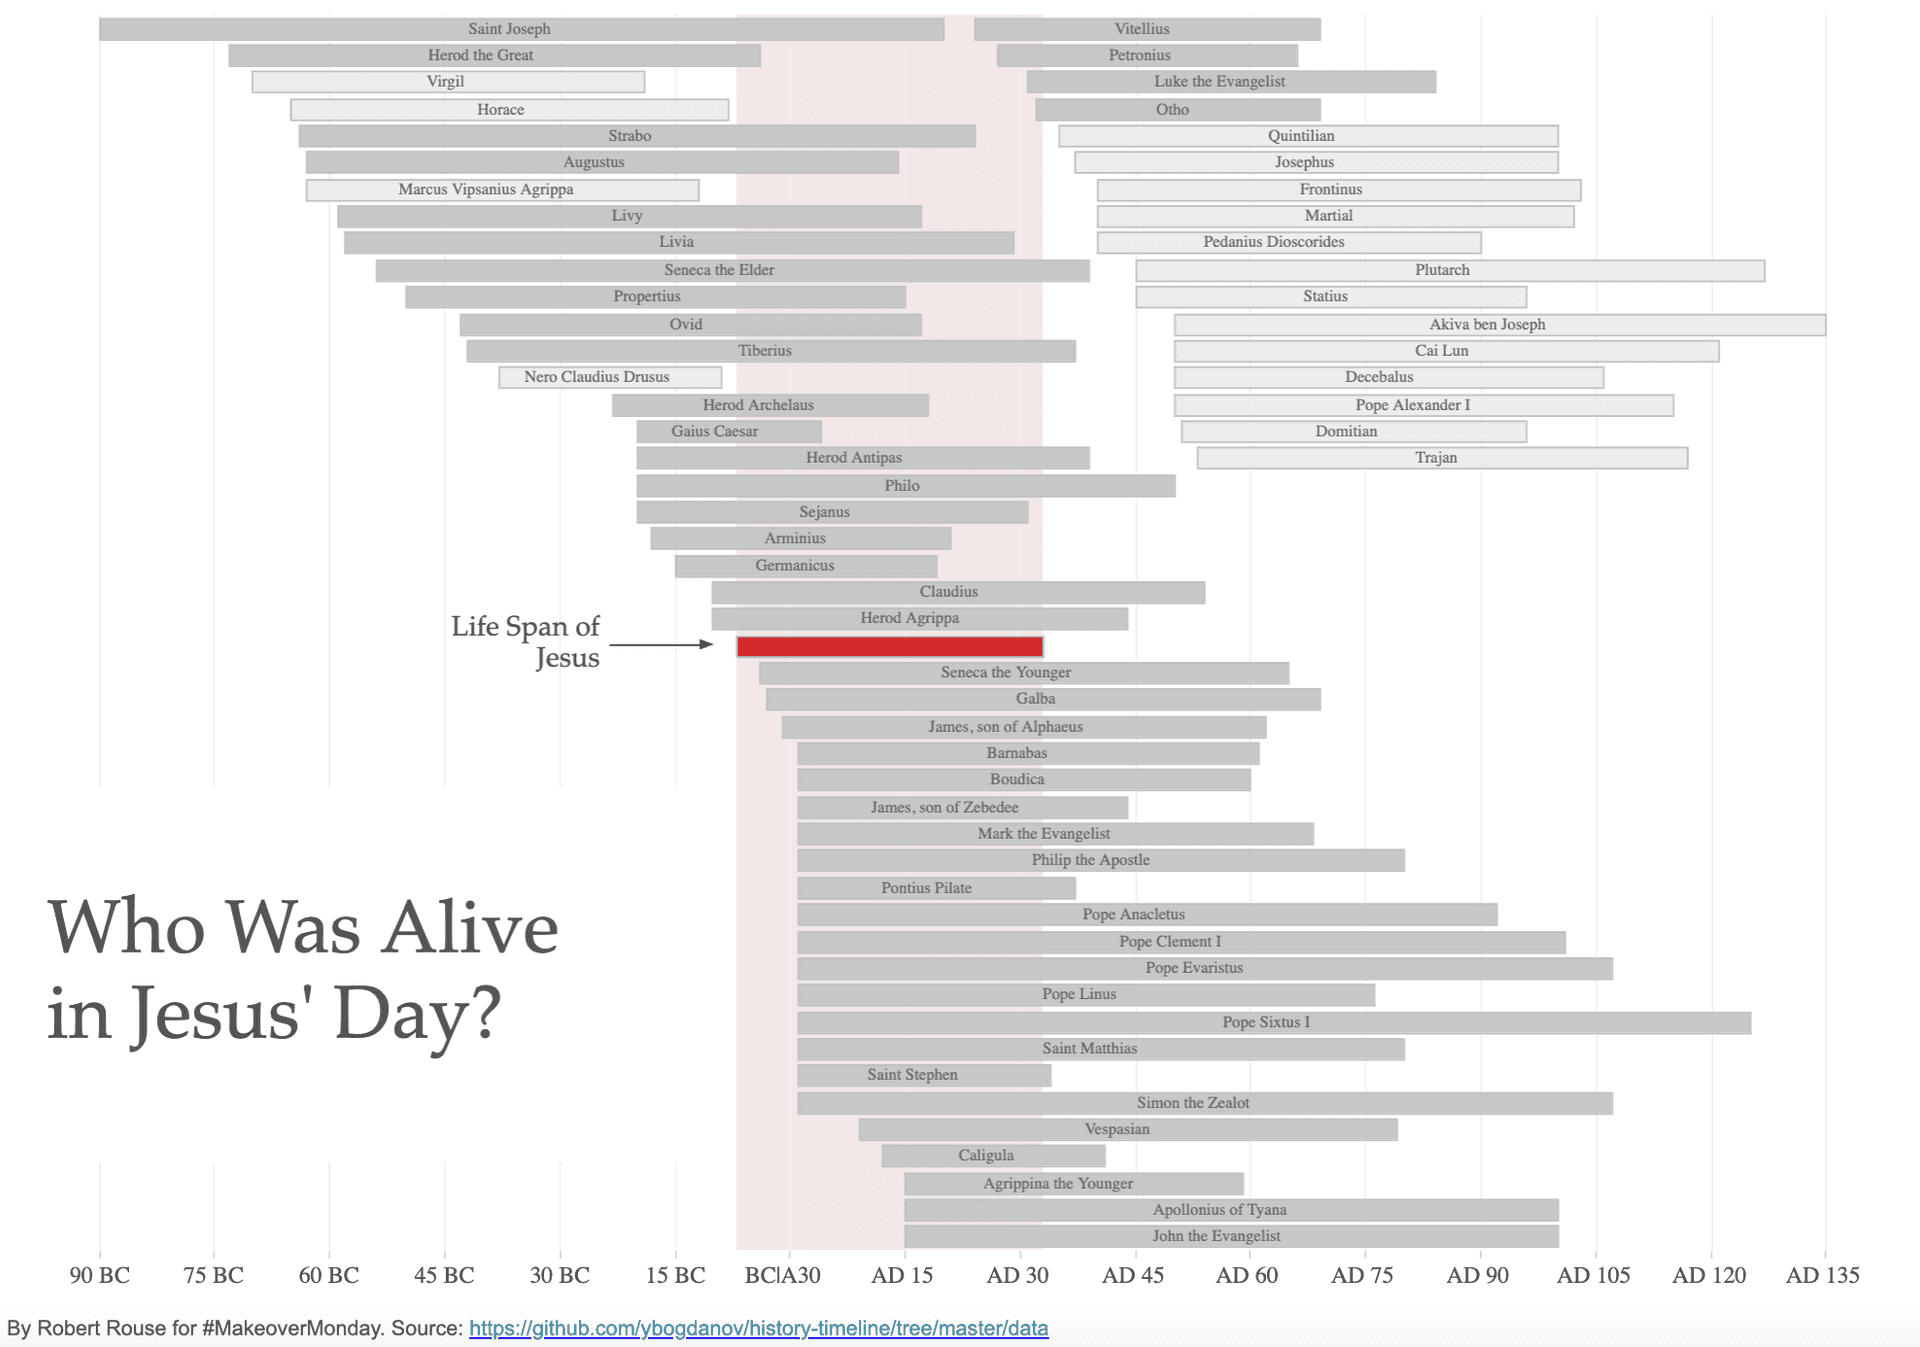 Who was Alive is Jesus’ Day?